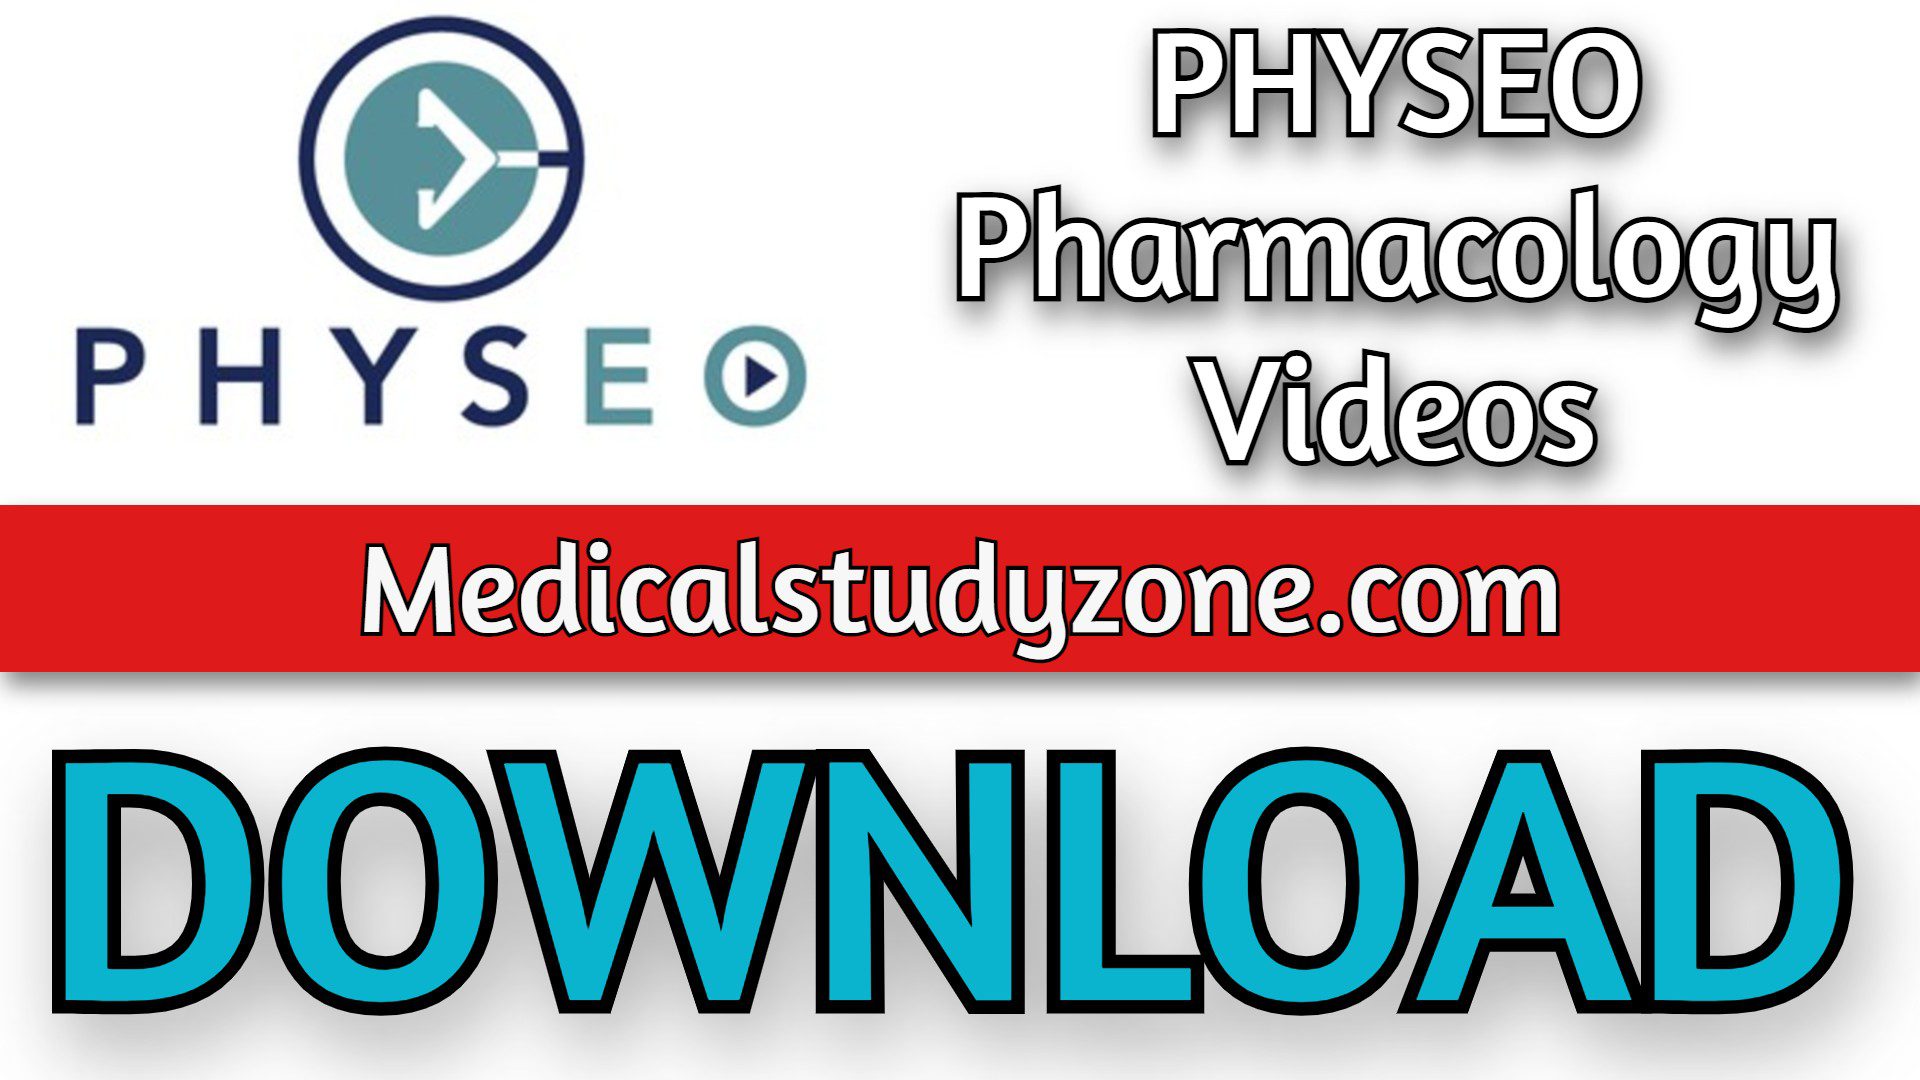 PHYSEO Pharmacology Videos 2023 Free Download